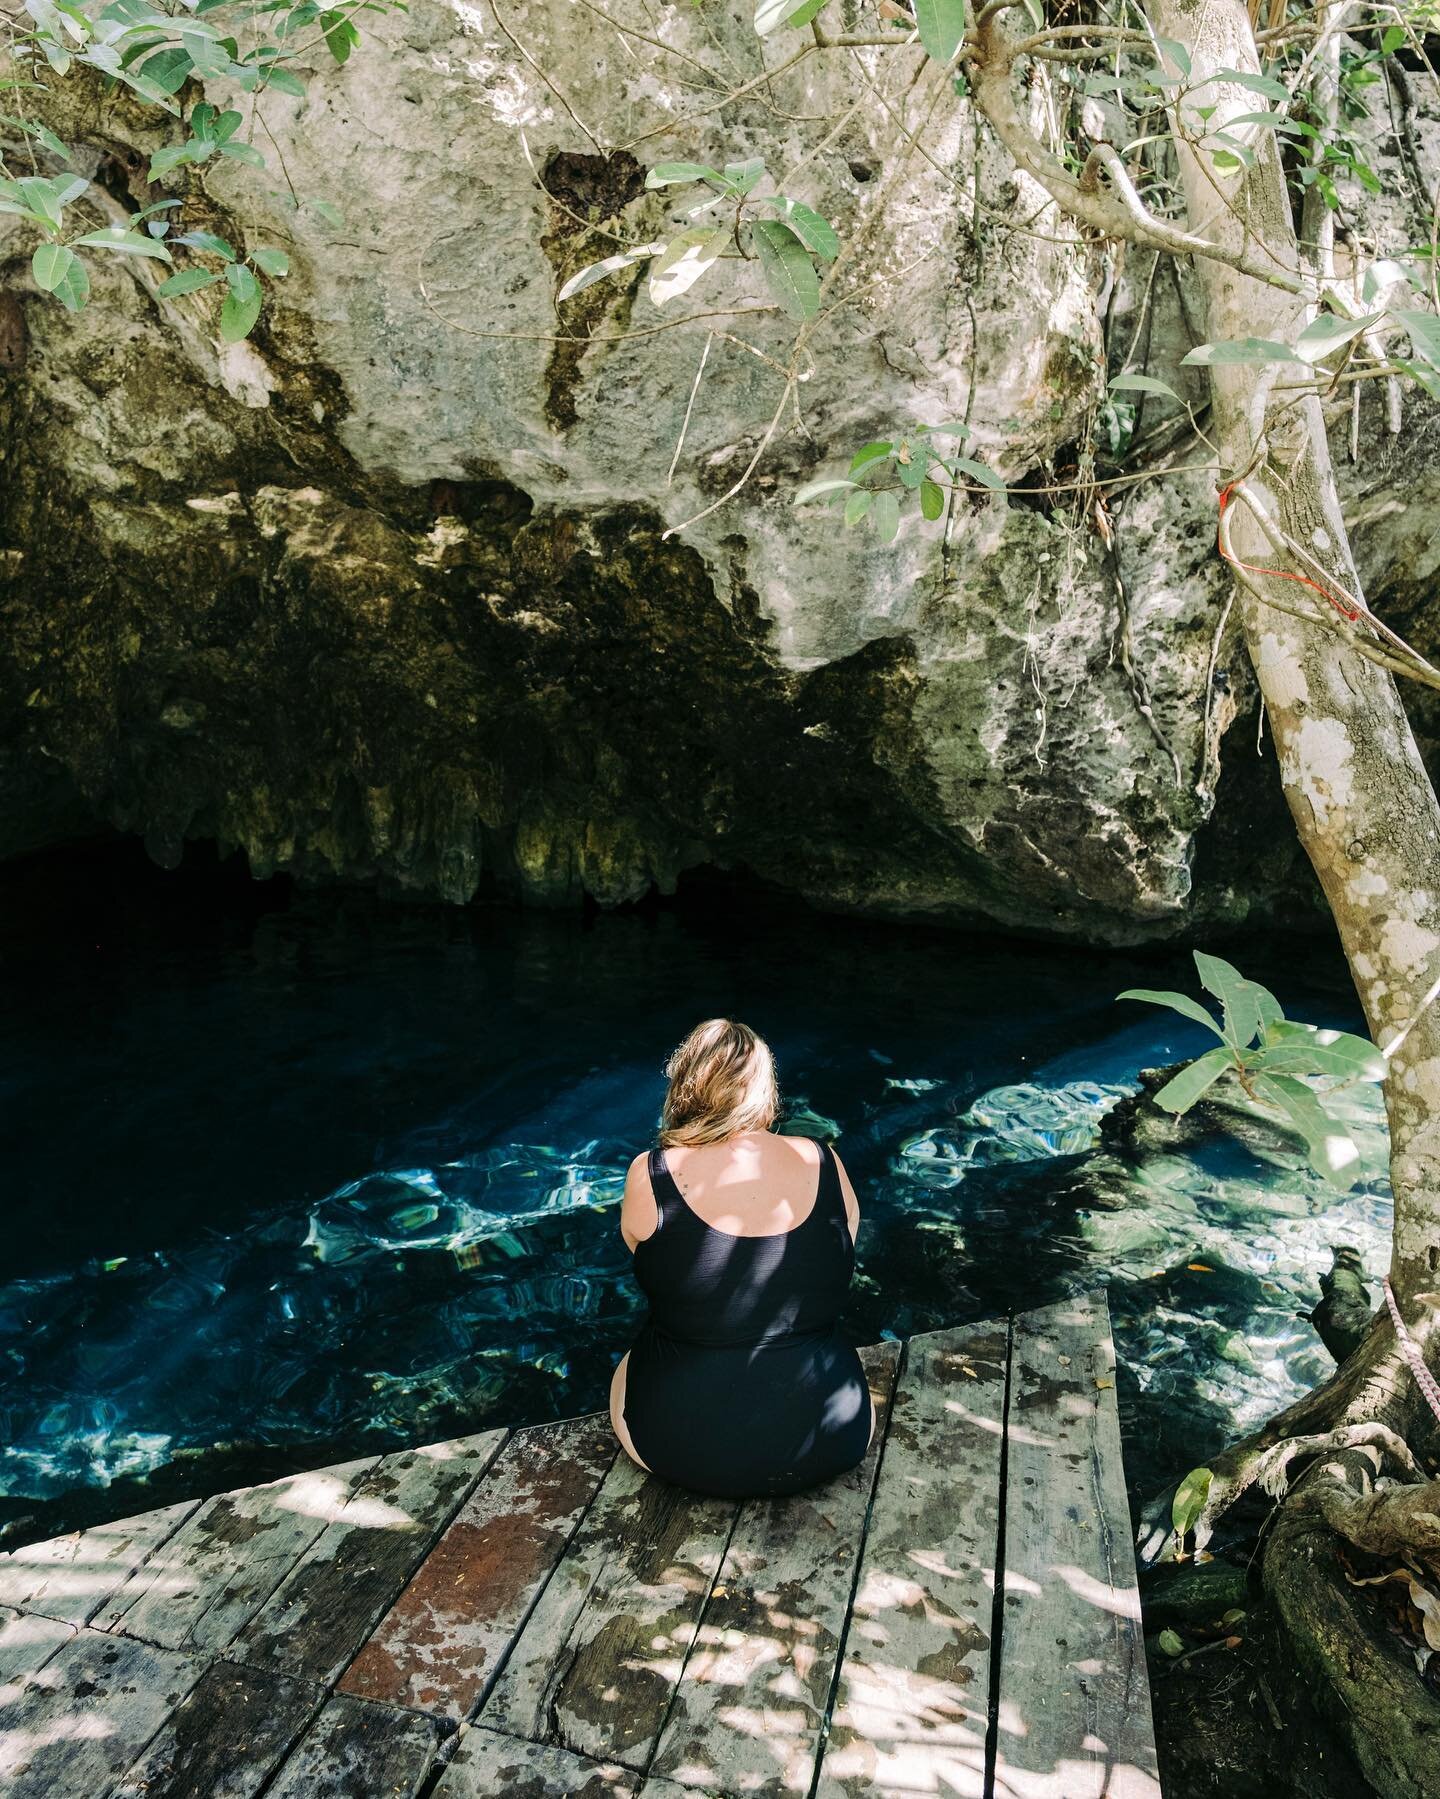 One of the most popular things to do around Tulum, the Gran Cenote, in our opinion actually lived up to the hype! 

Compared to a few other cenotes we visited, this one is quite large which makes it not feel so crowded, it&rsquo;s got great facilitie